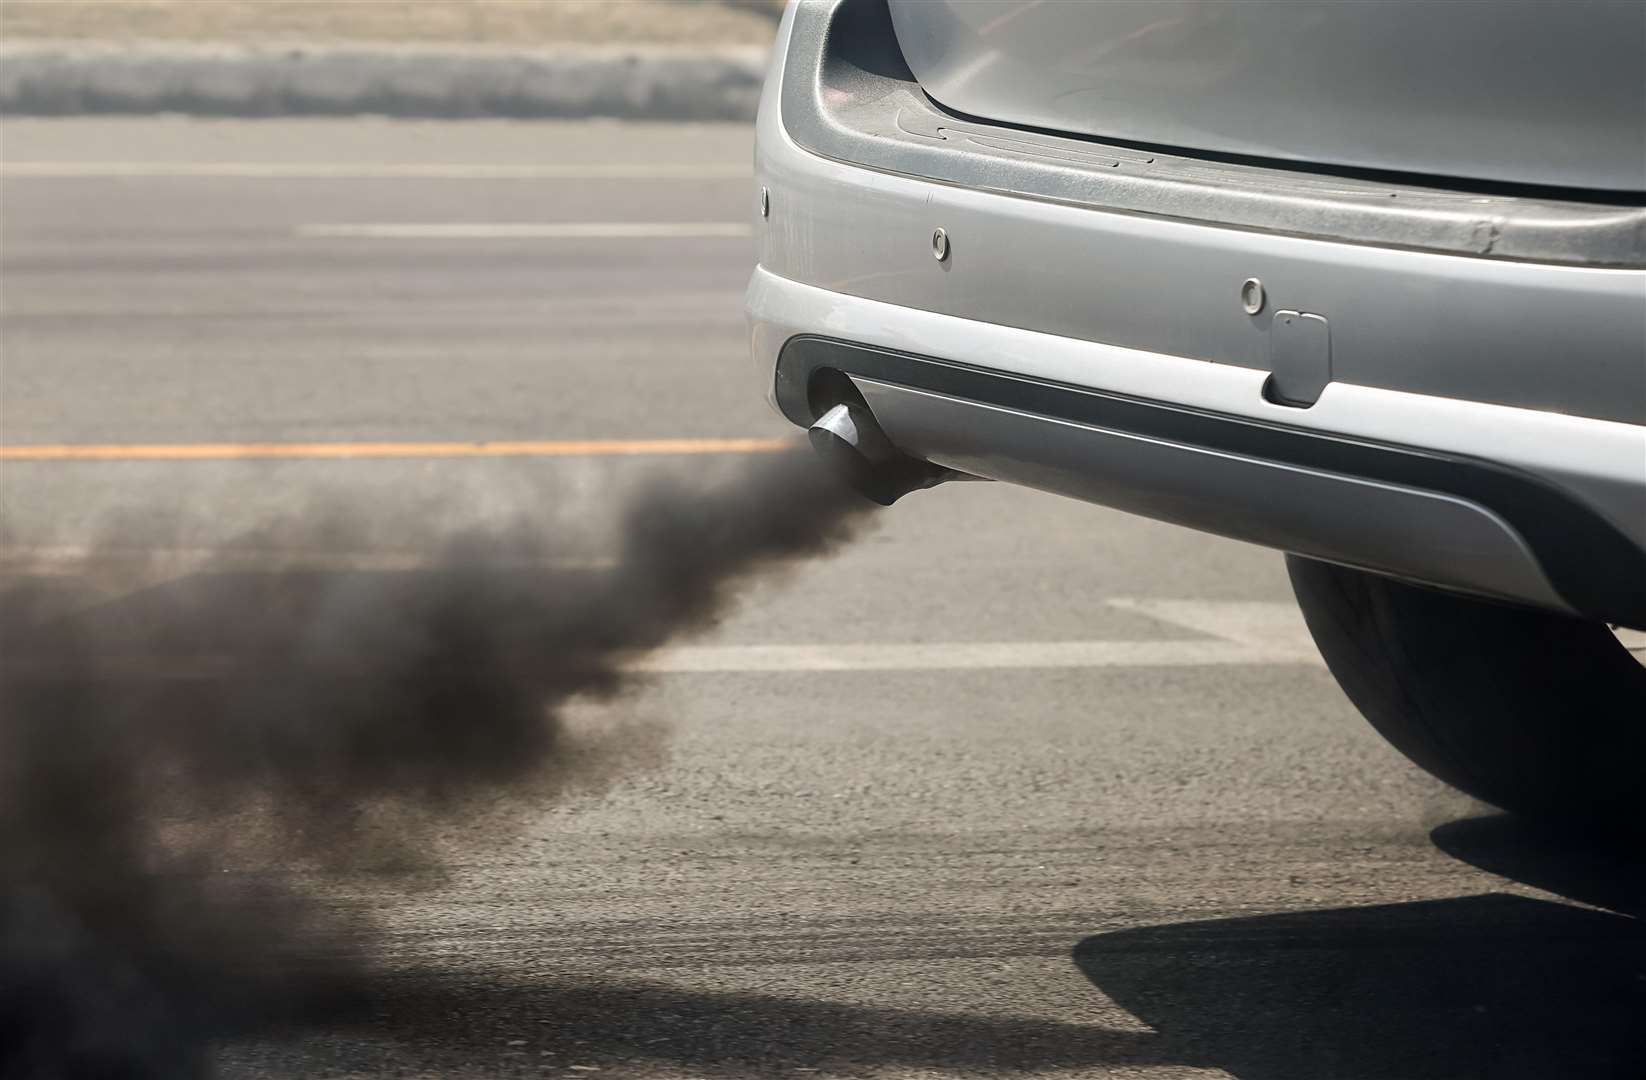 Air pollution from vehicle exhaust pipe on road. (6623325)